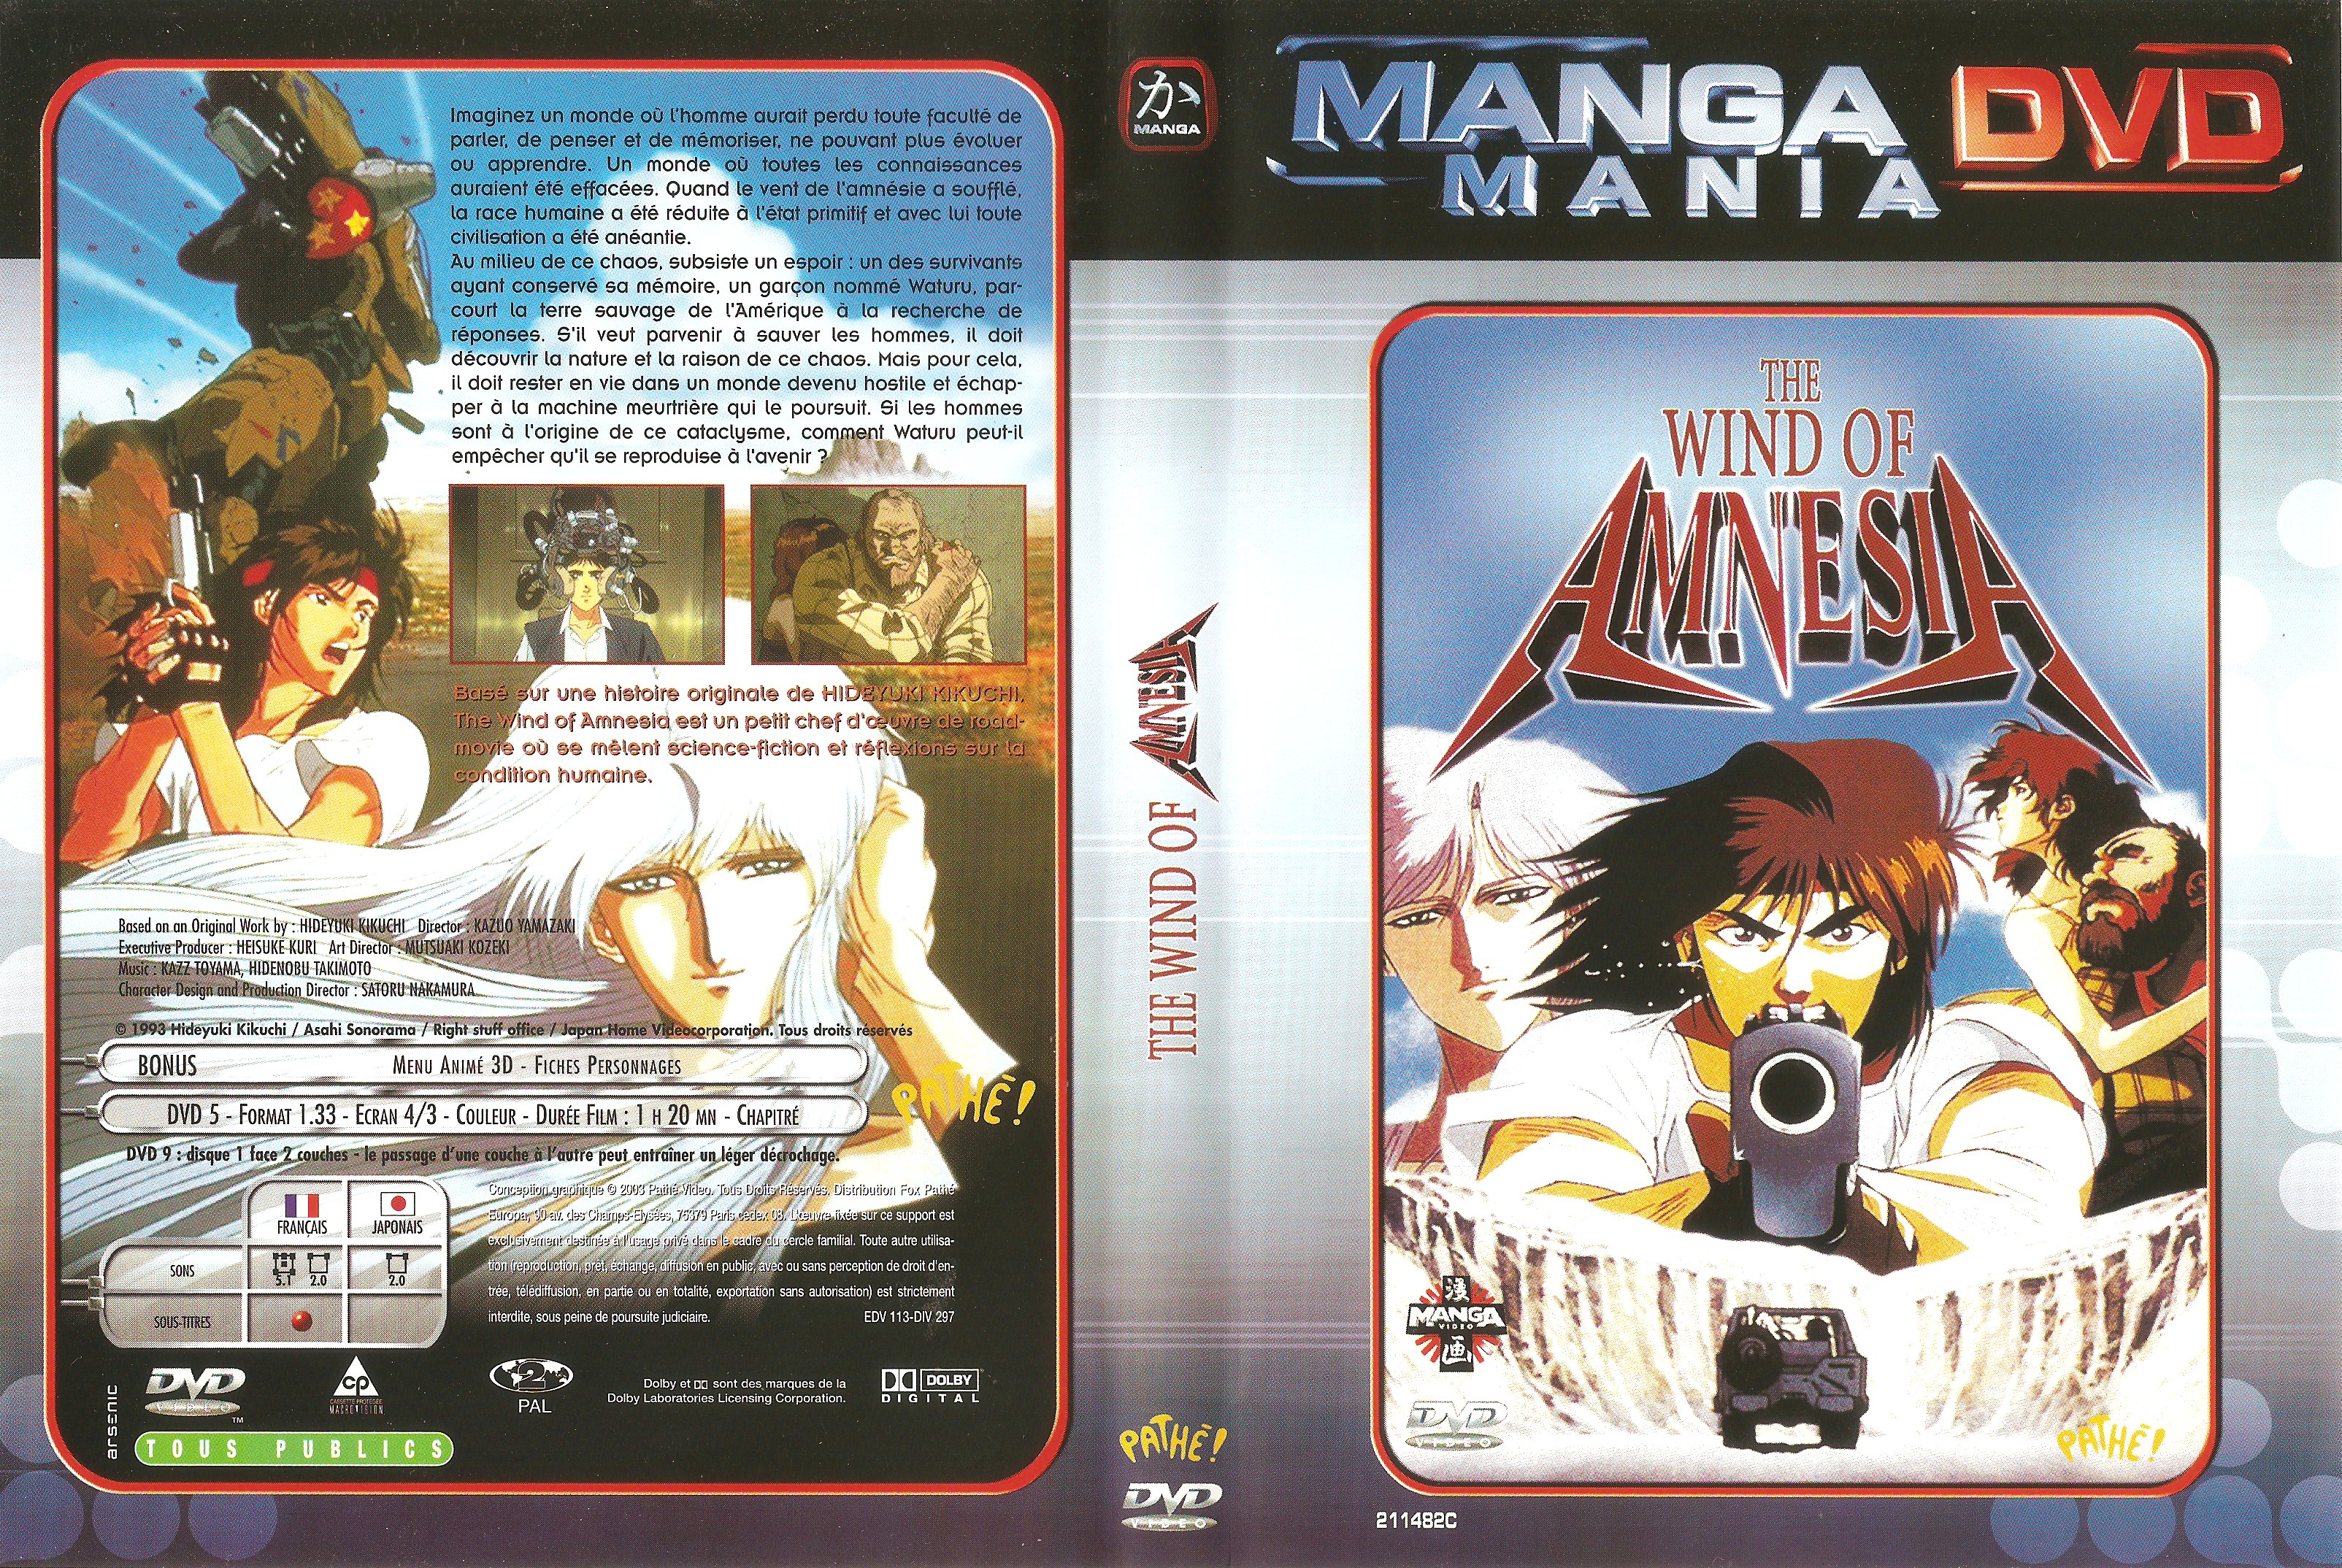 Jaquette DVD The Wind of Amnesia v2